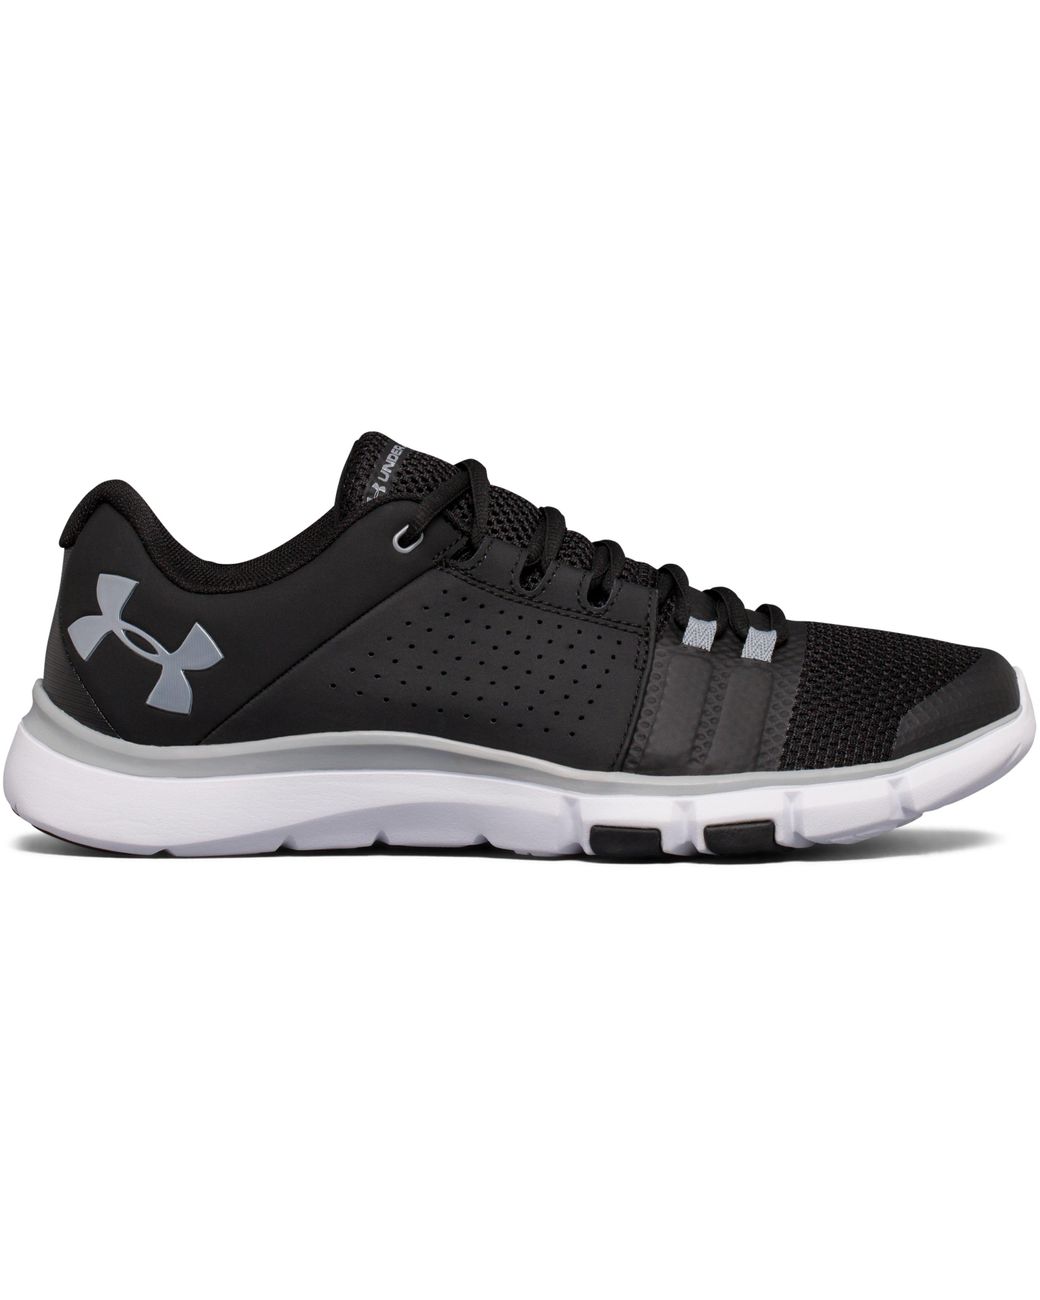 Under Armour Men's Ua Strive 7 – Wide (2e) Training Shoes in Black for ...